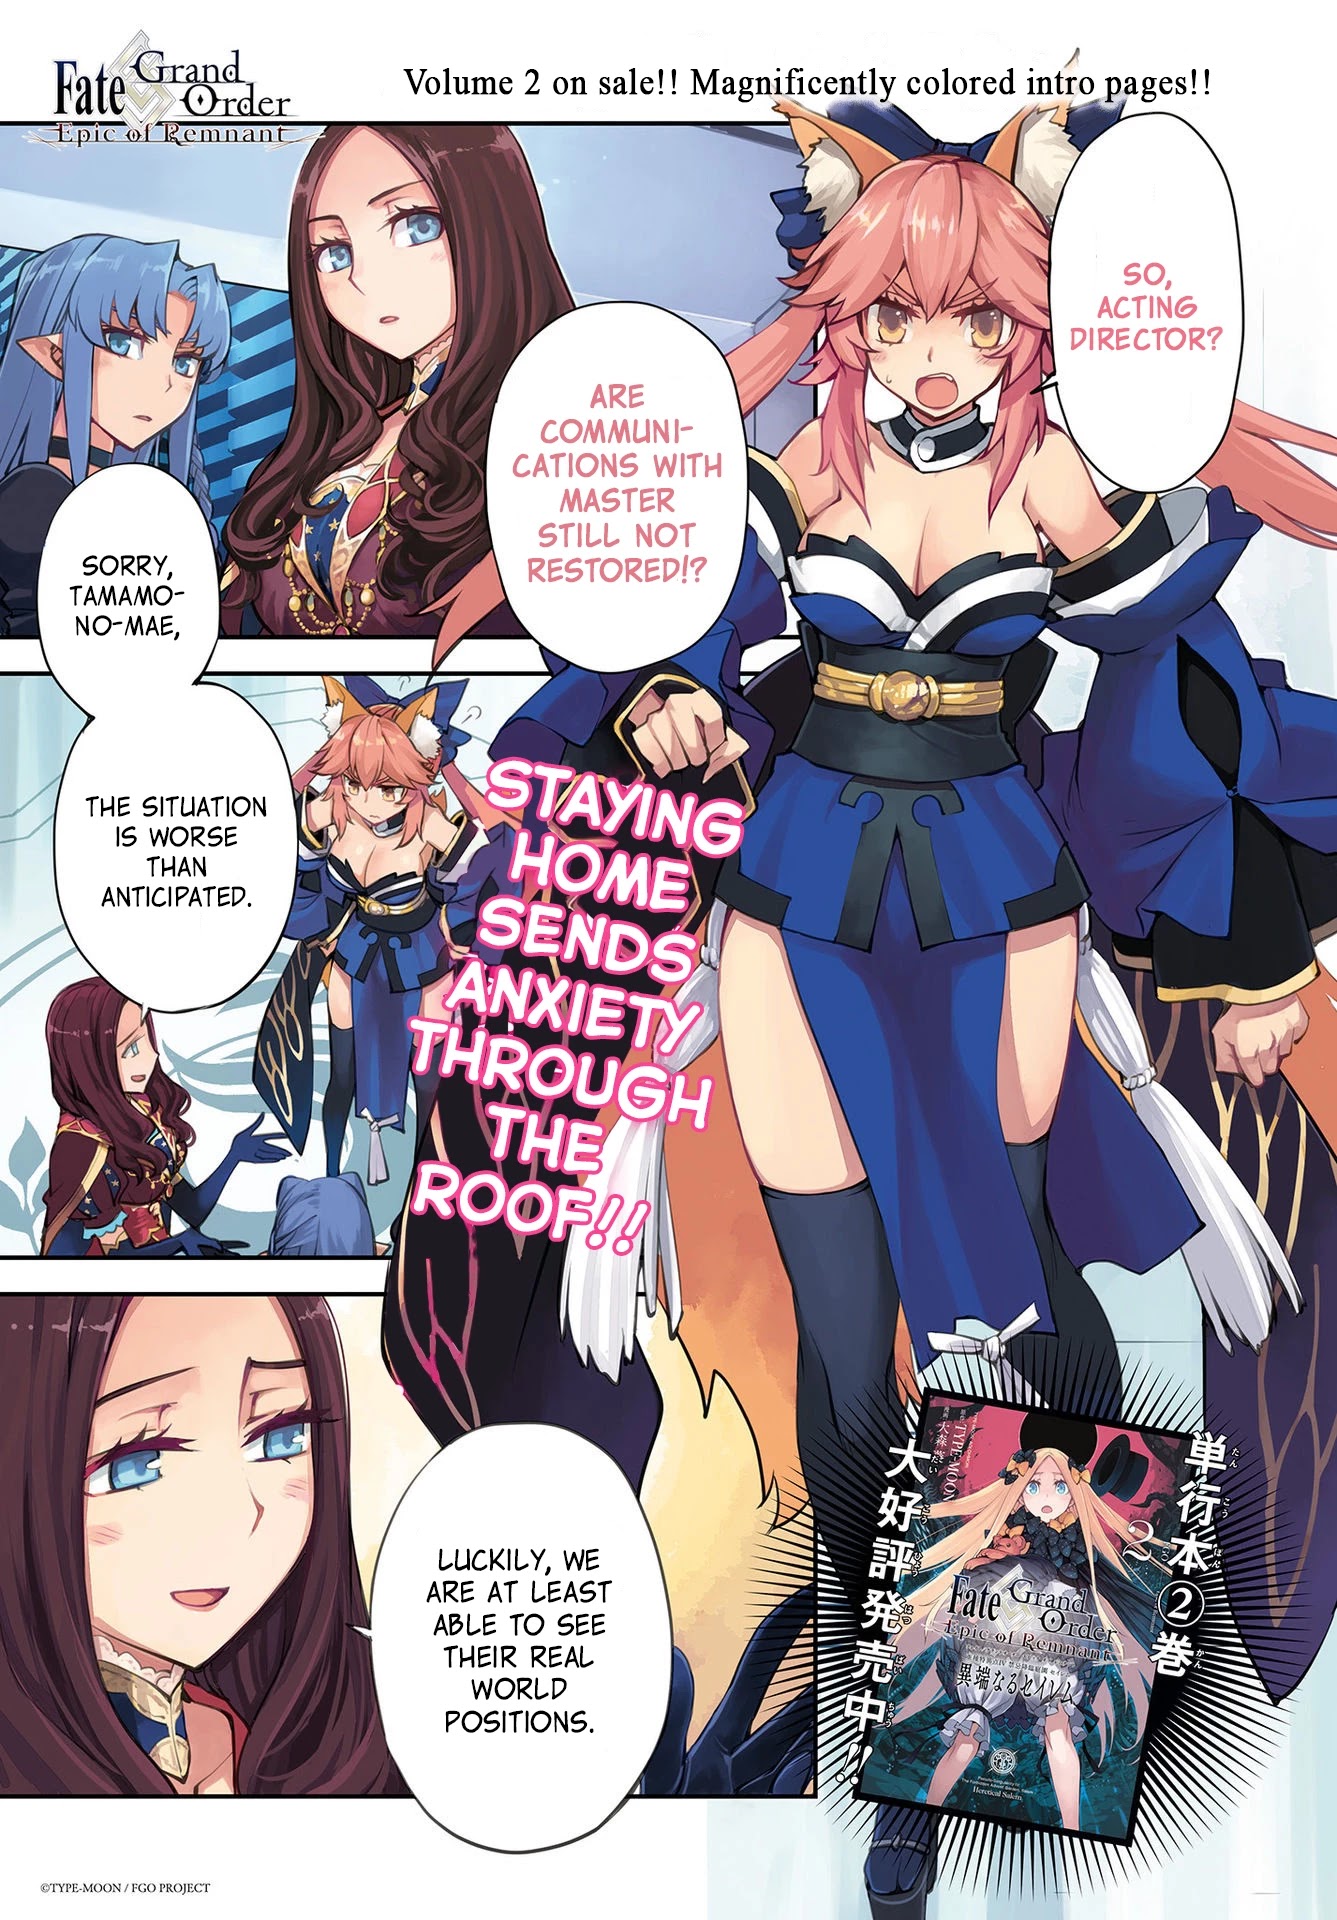 Fate/grand Order: Epic Of Remnant - Subspecies Singularity Iv: Taboo Advent Salem: Salem Of Heresy - Page 1